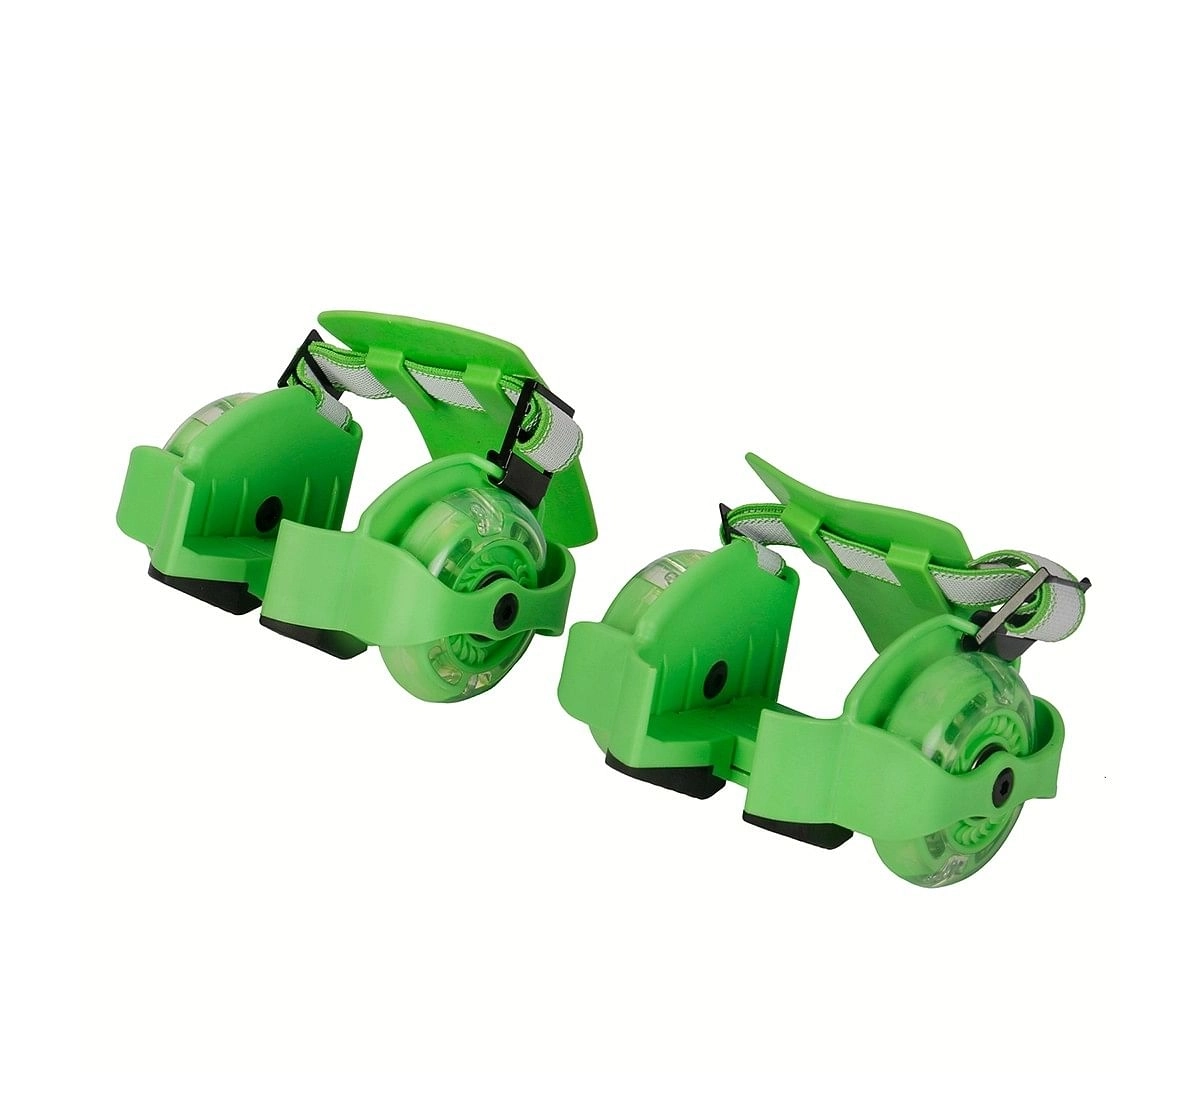 Hamleys Street Gliders (Green) Skates and Skateboards for Kids age 5Y+ (Green)